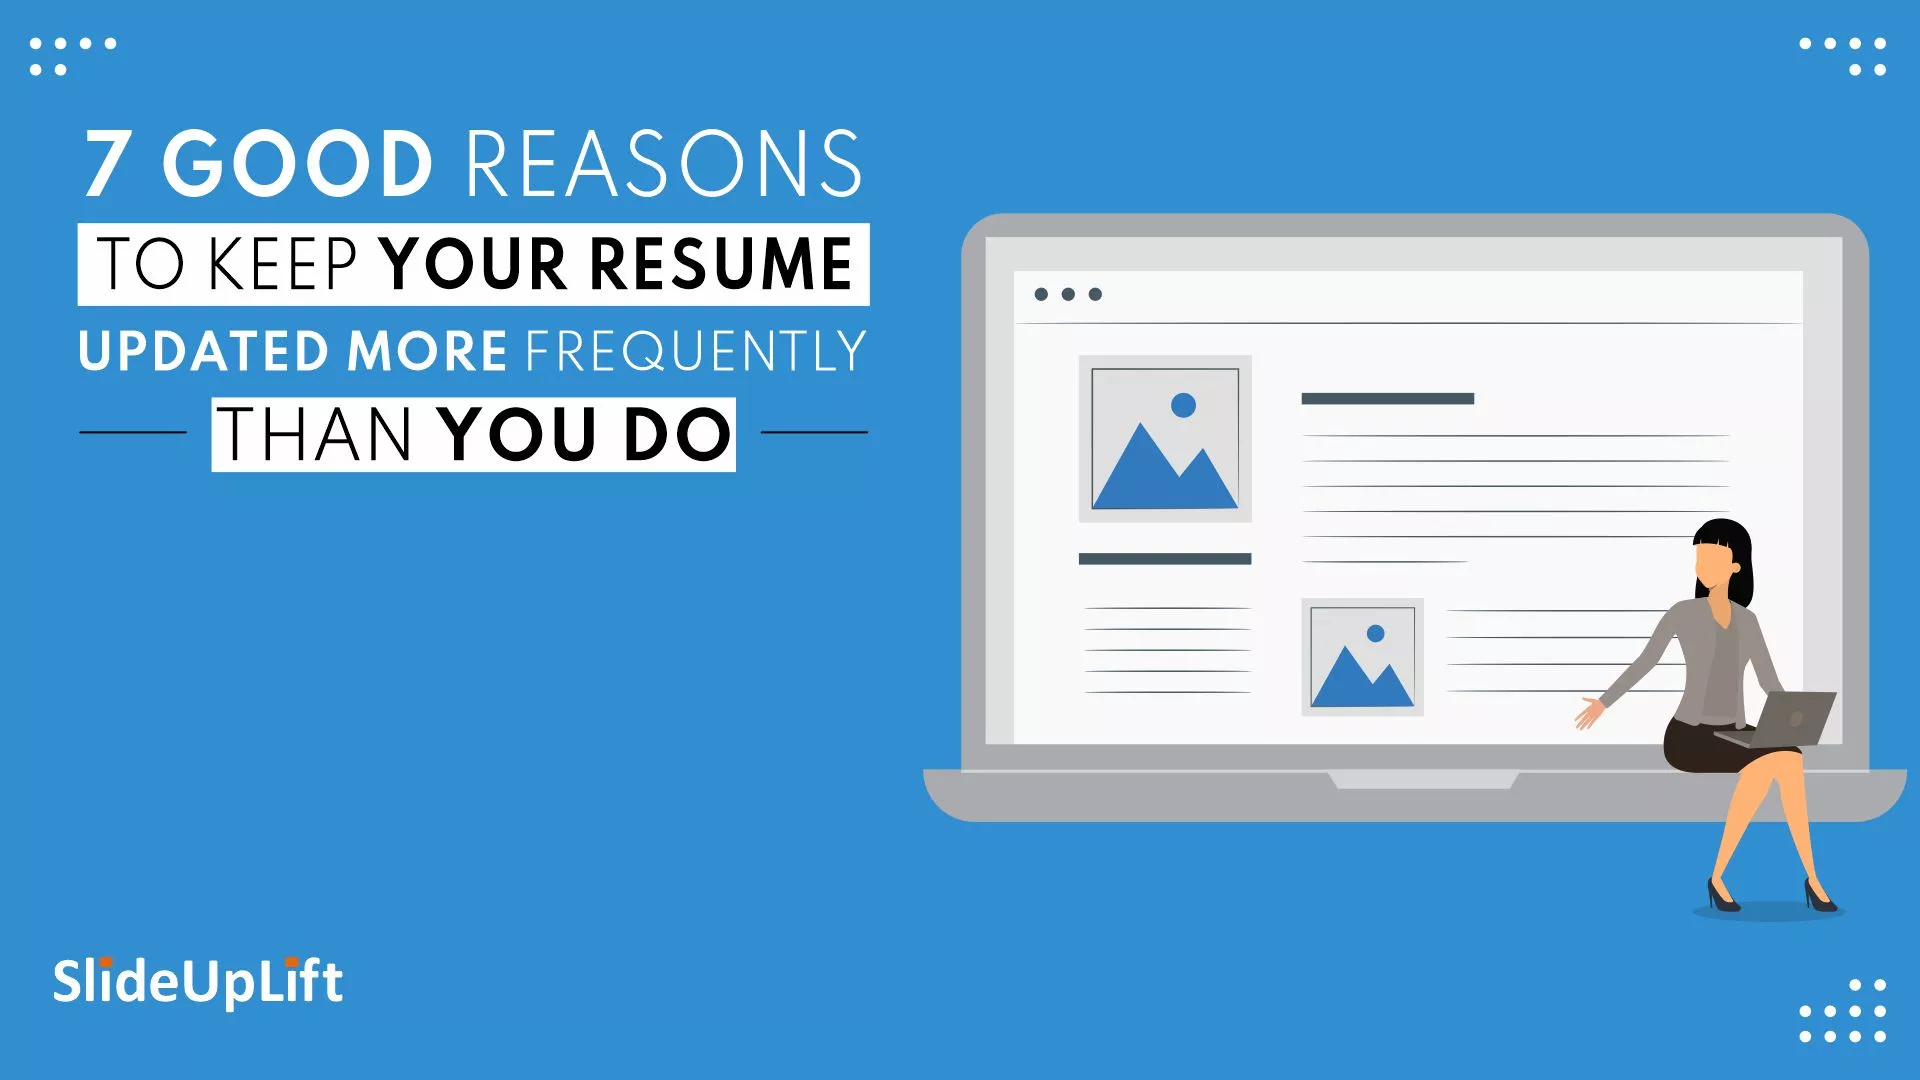 7 Good Reasons To Keep Your Resume Updated More Frequently Than You Do